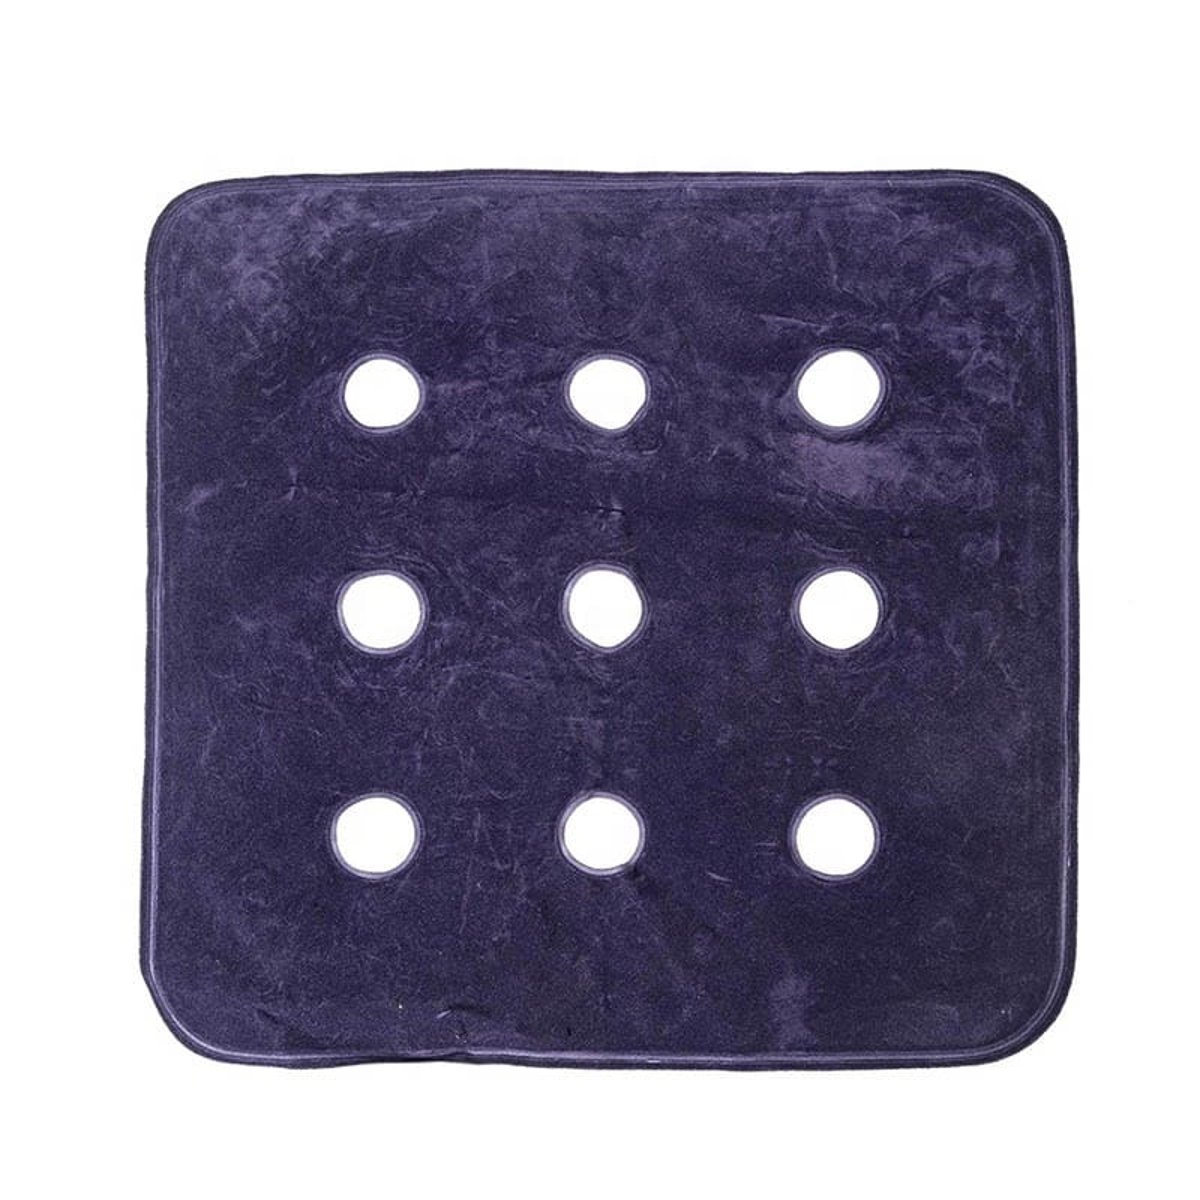 https://images.verishop.com/vigor-titinflatable-waffle-cushion-for-bed-sore-cushions-for-butt-for-elderly-suitable-for-bedridden-disabled-breathabl-comfort/M00749565874250-1225020404?auto=format&cs=strip&fit=max&w=1200